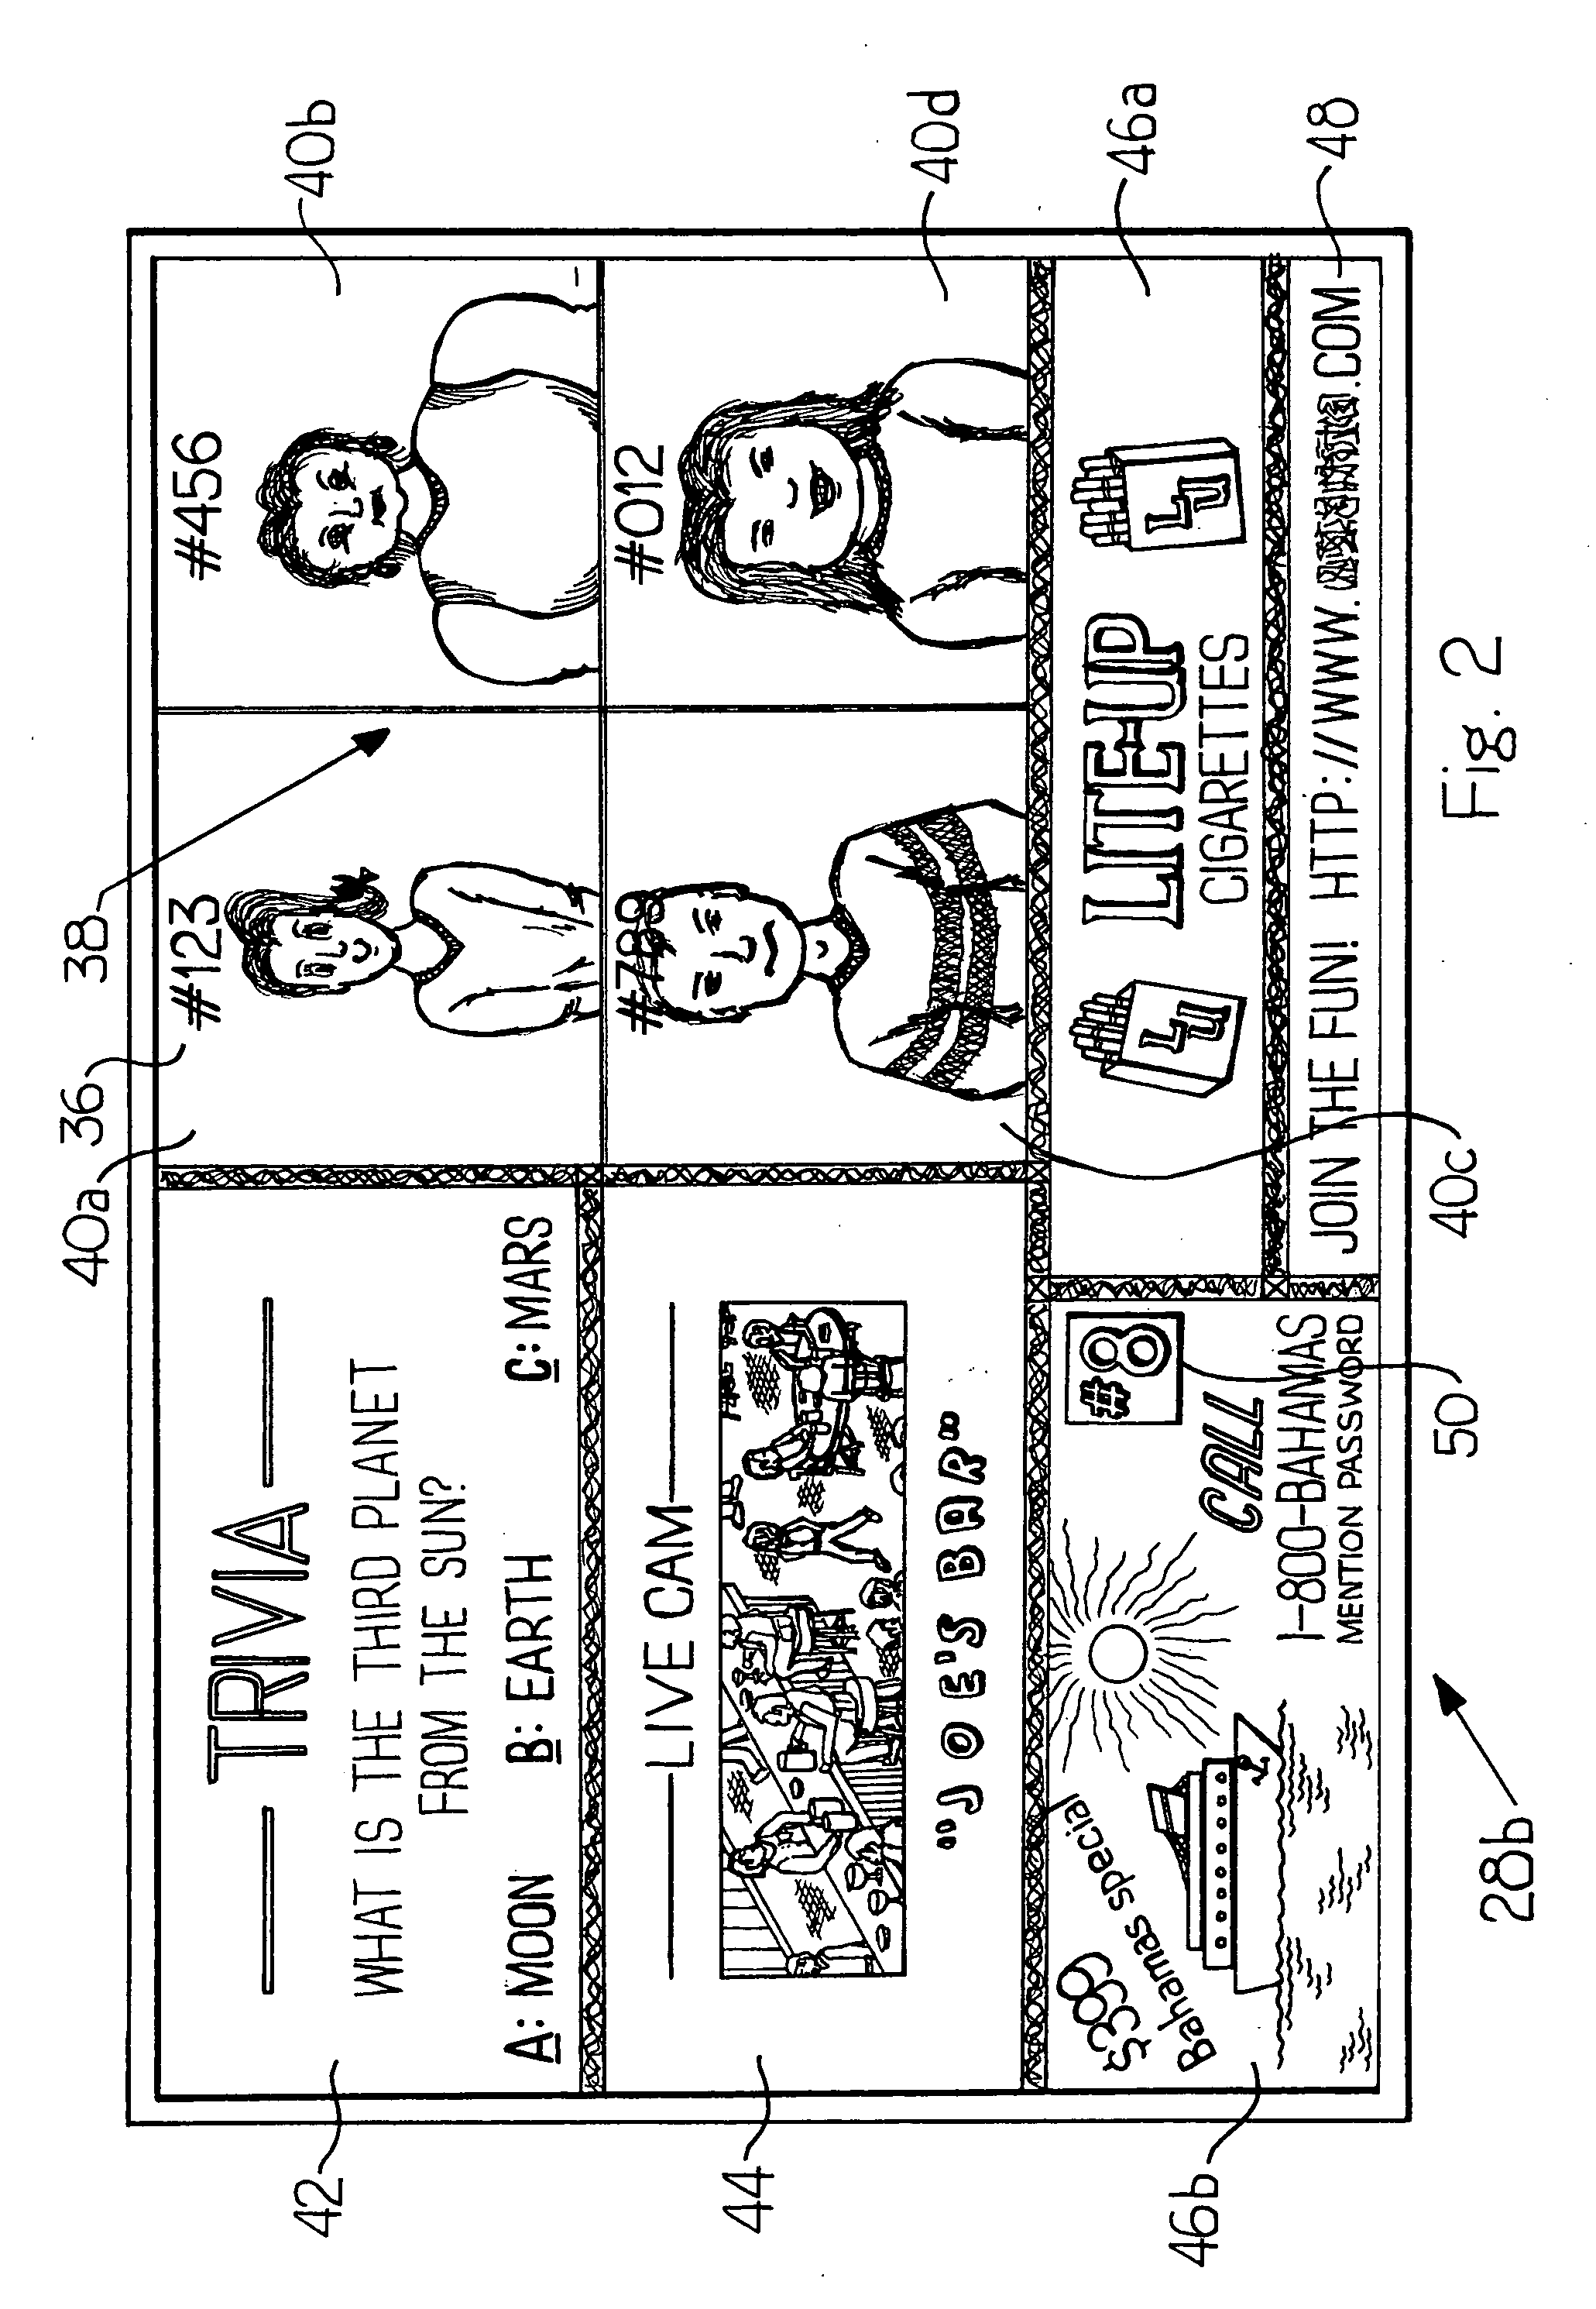 Subscriber network system and method for viewing images and exchanging messages